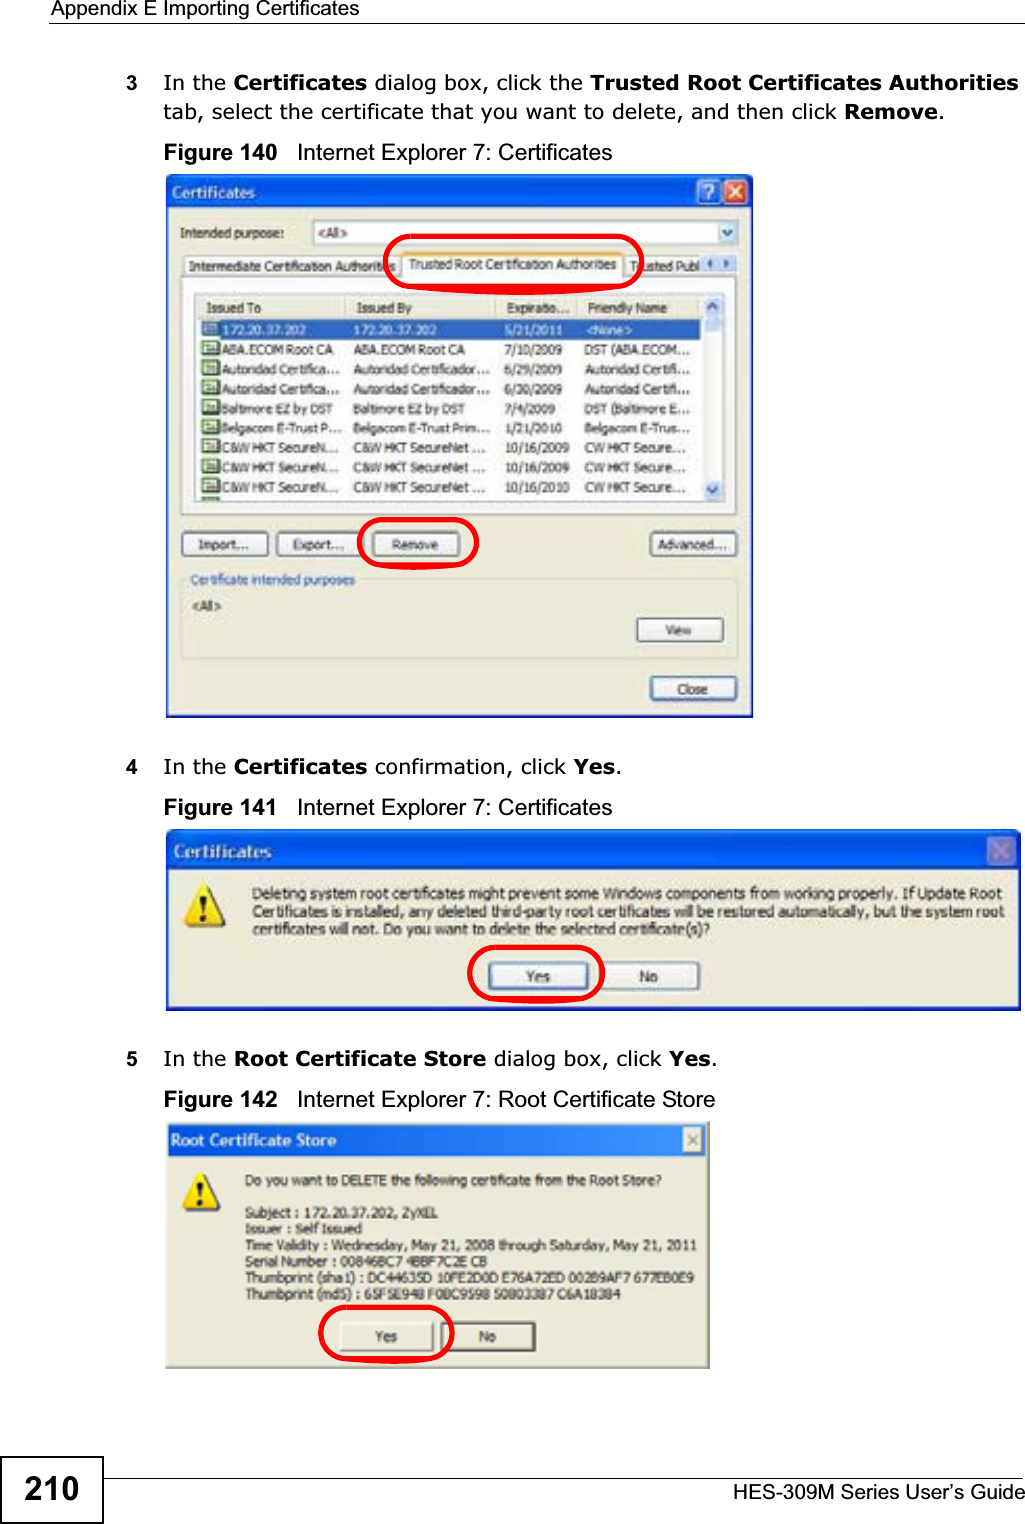 Appendix E Importing CertificatesHES-309M Series User’s Guide2103In the Certificates dialog box, click the Trusted Root Certificates Authoritiestab, select the certificate that you want to delete, and then click Remove.Figure 140   Internet Explorer 7: Certificates4In the Certificates confirmation, click Yes.Figure 141   Internet Explorer 7: Certificates5In the Root Certificate Store dialog box, click Yes.Figure 142   Internet Explorer 7: Root Certificate Store